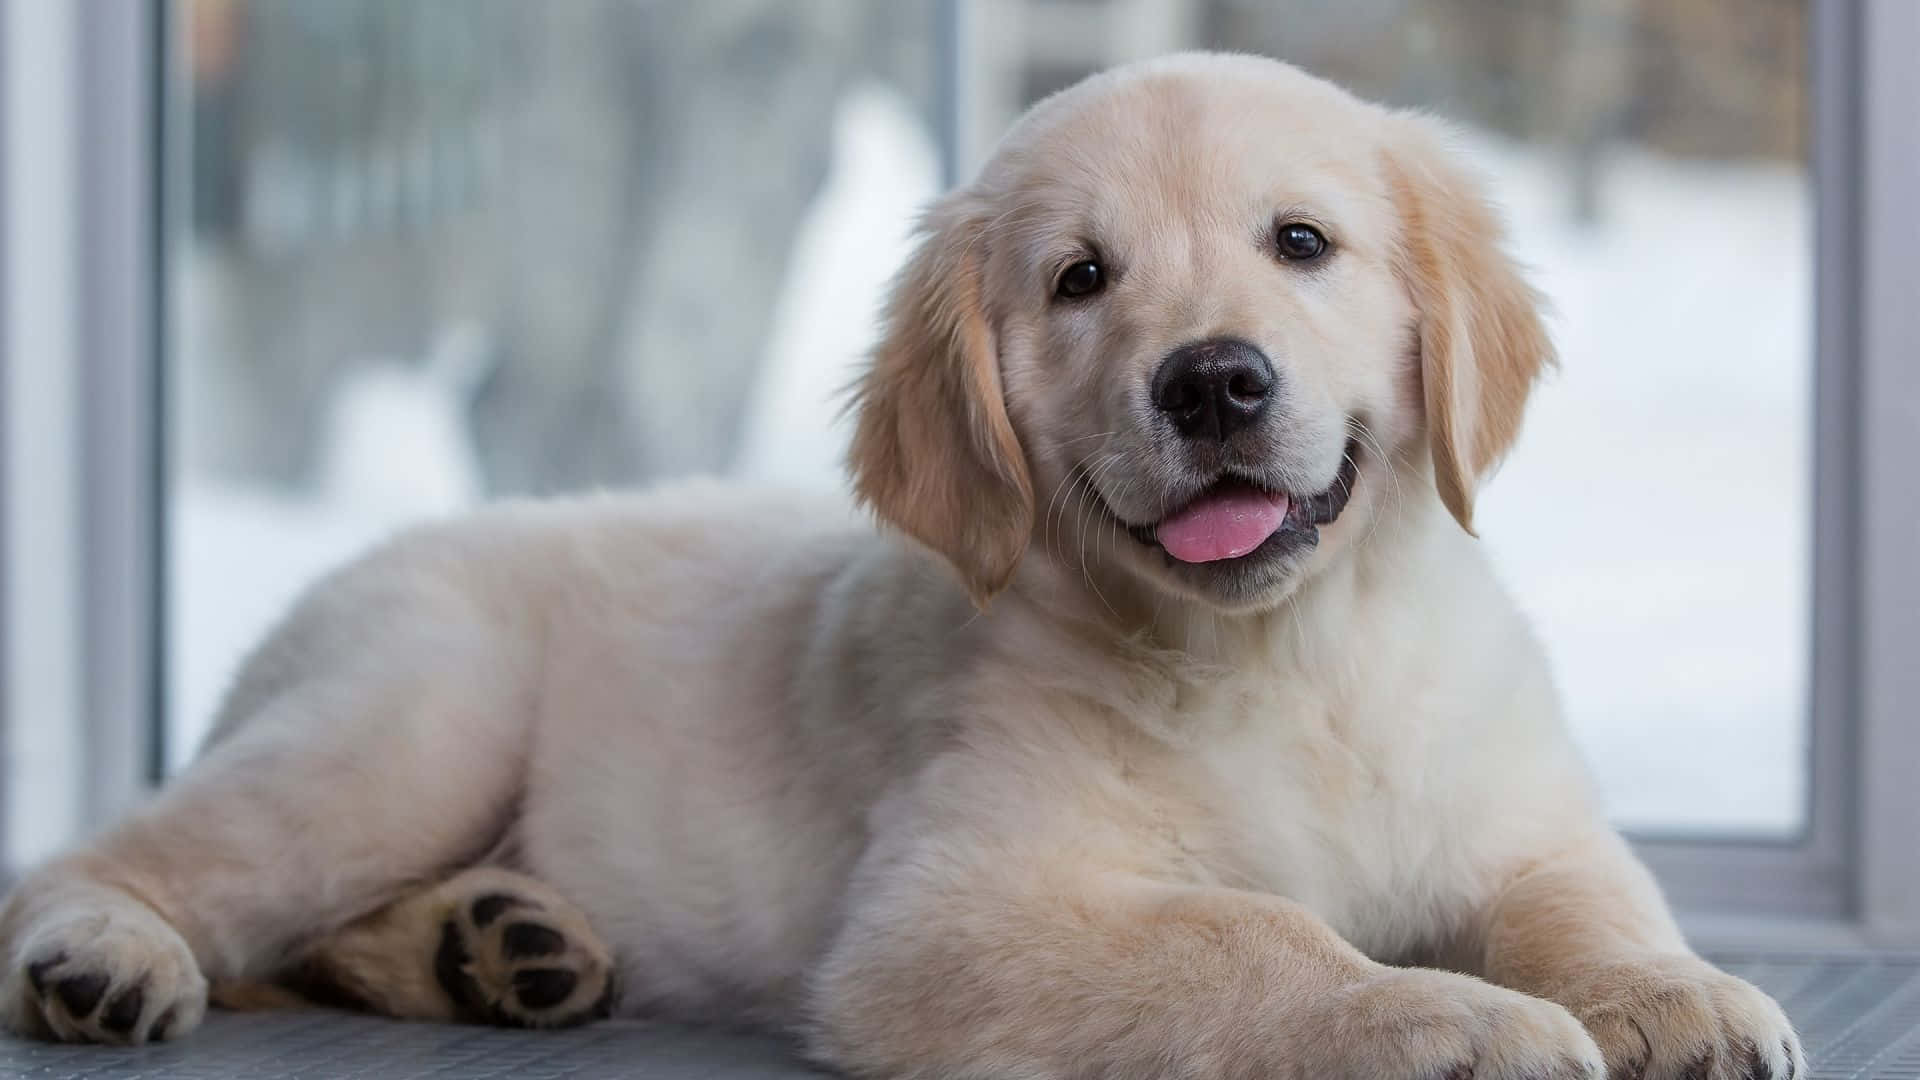 An Adorable Golden Retriever Puppy Looking Up At The Camera. Background